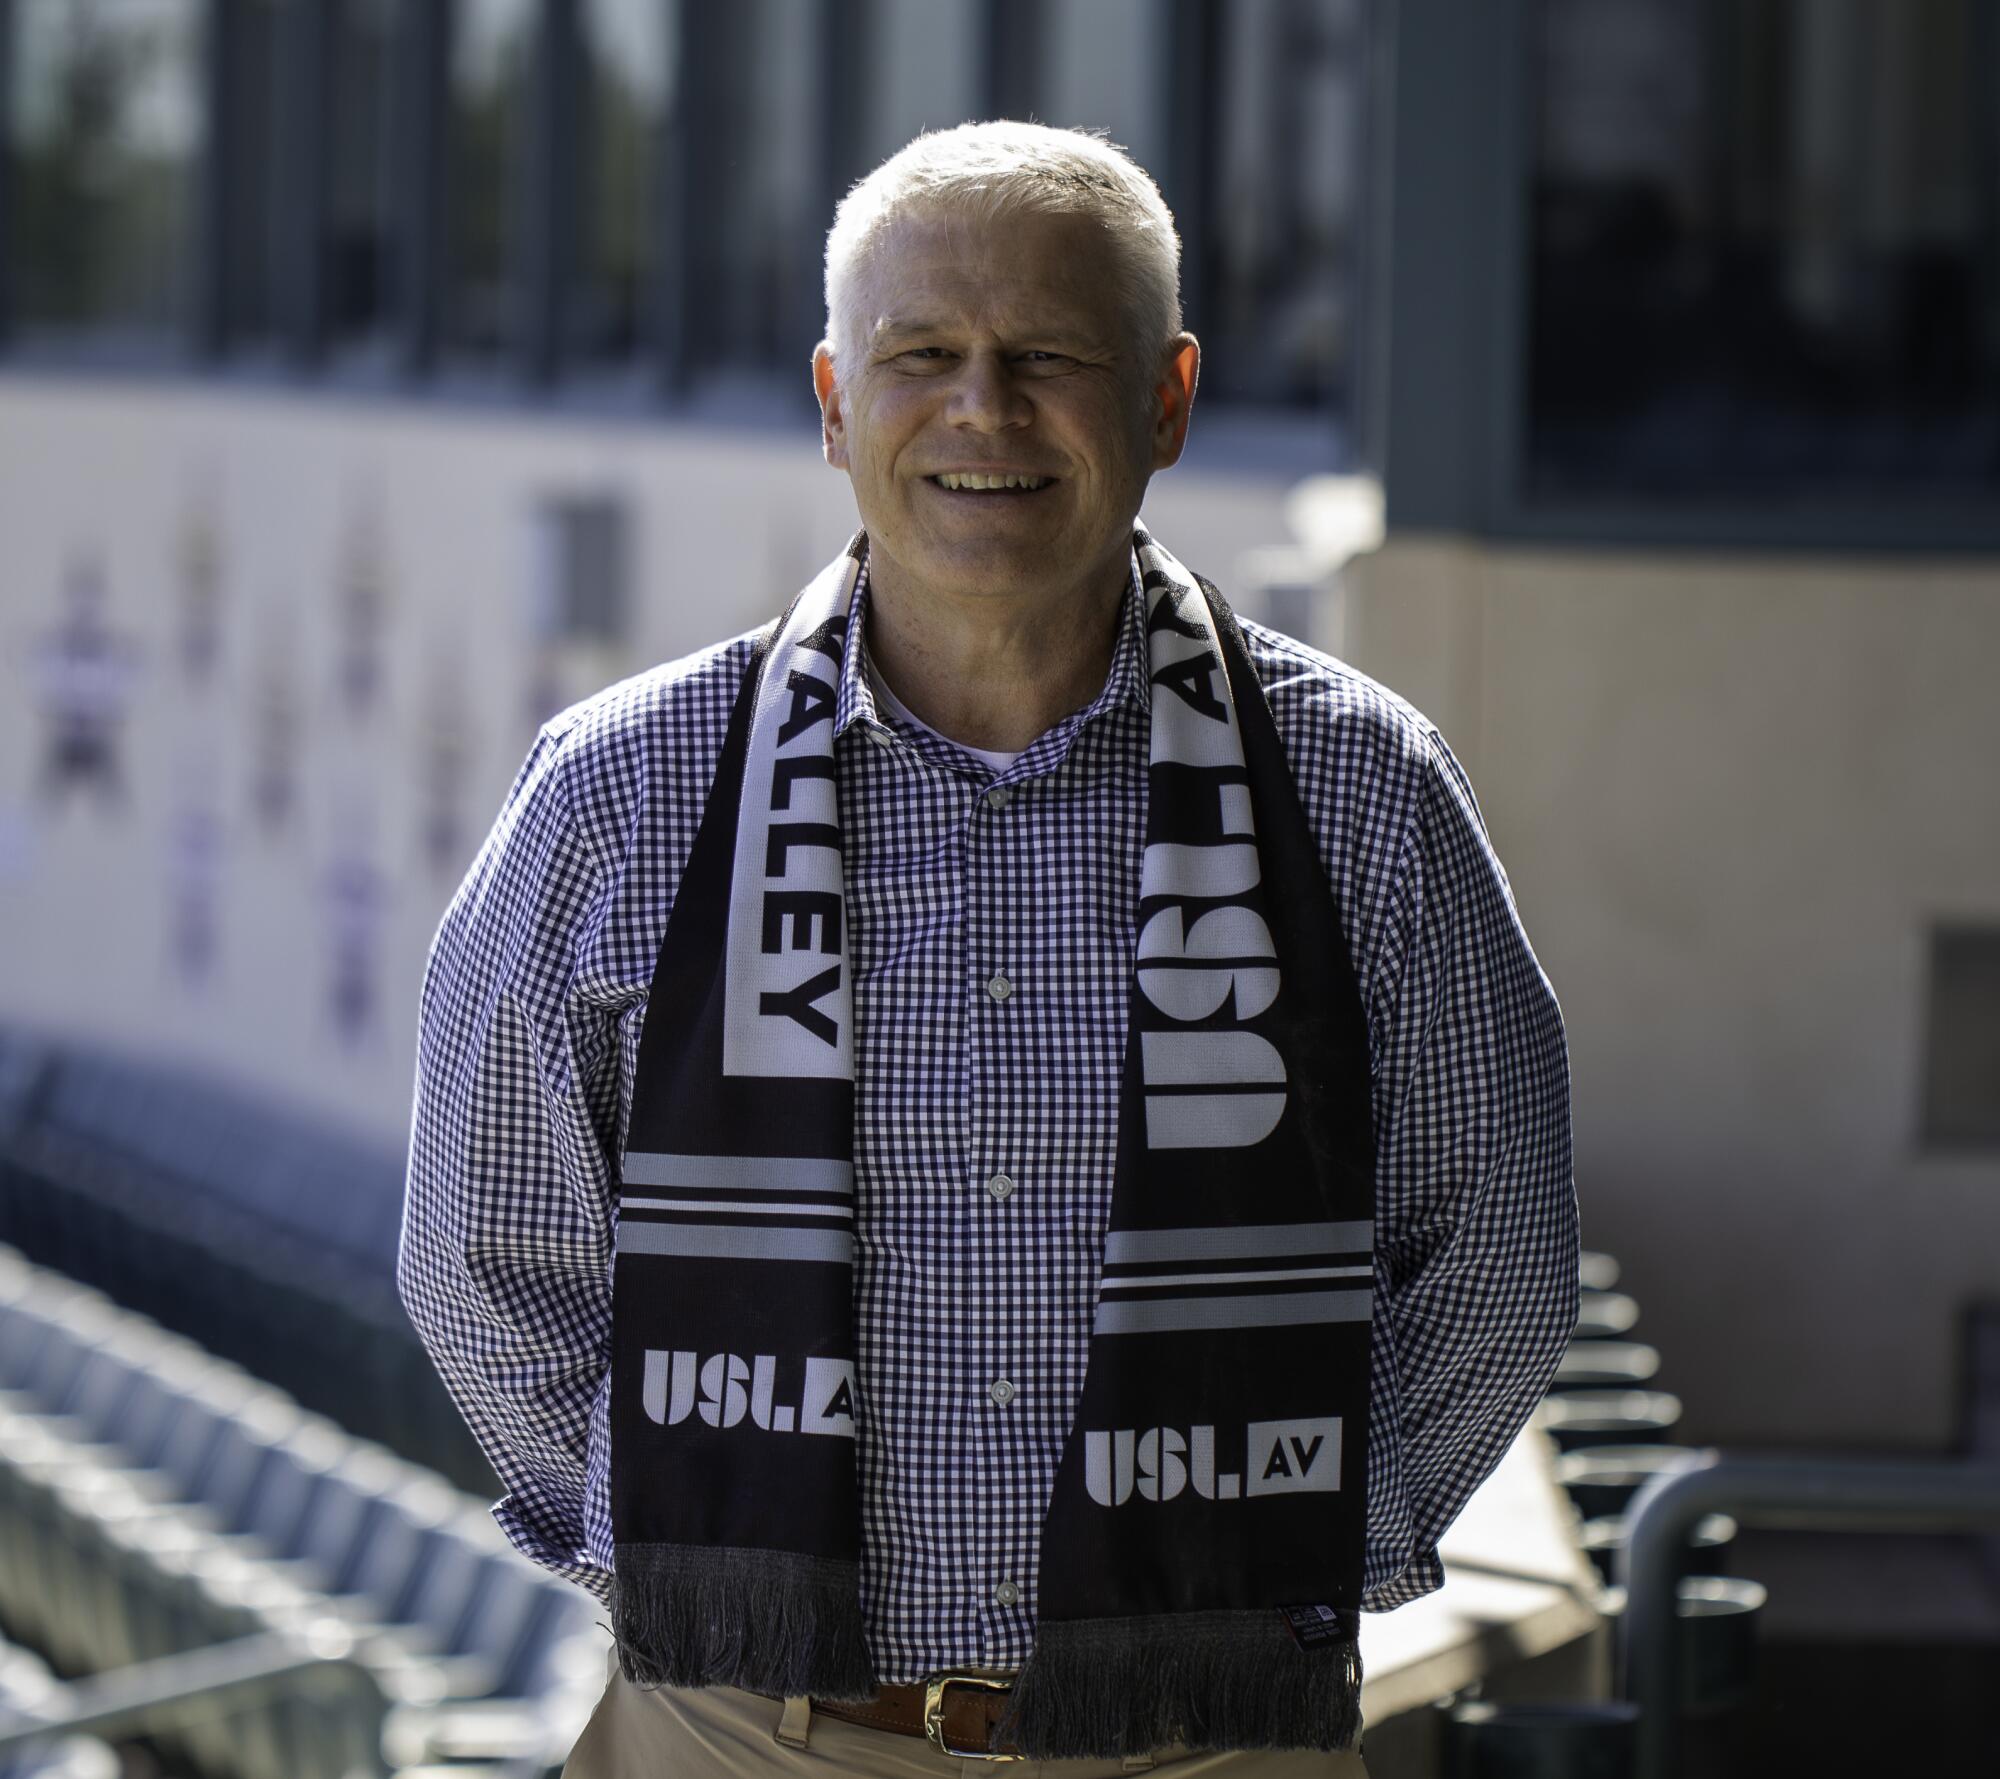 John Smelzer, owner of the proposed Antelope Valley USL One franchise.